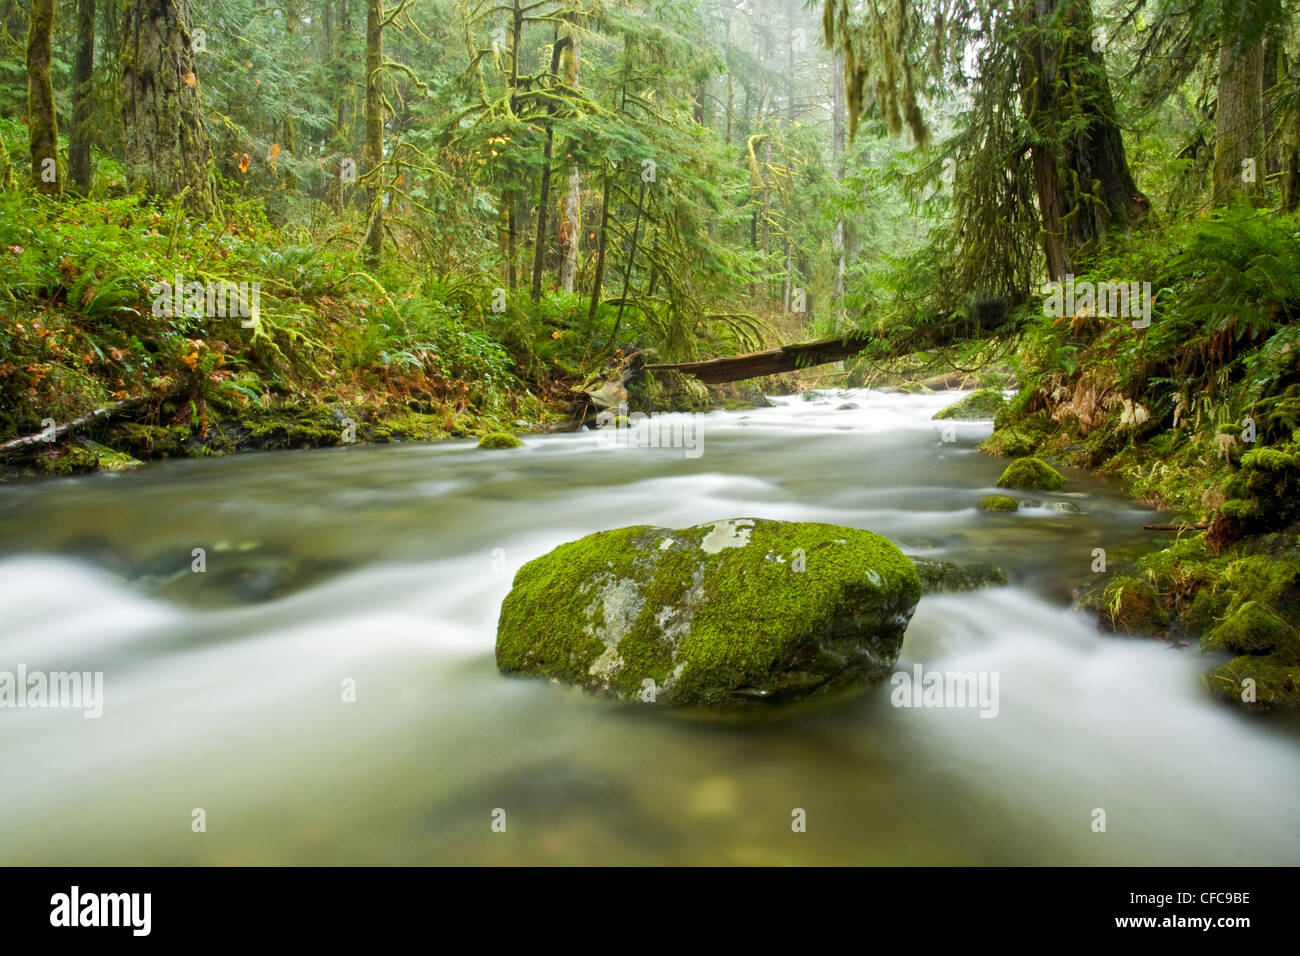 A scenic photo of a temperate rainforest landscape on Vancouver Island, BC, Canada. Stock Photo